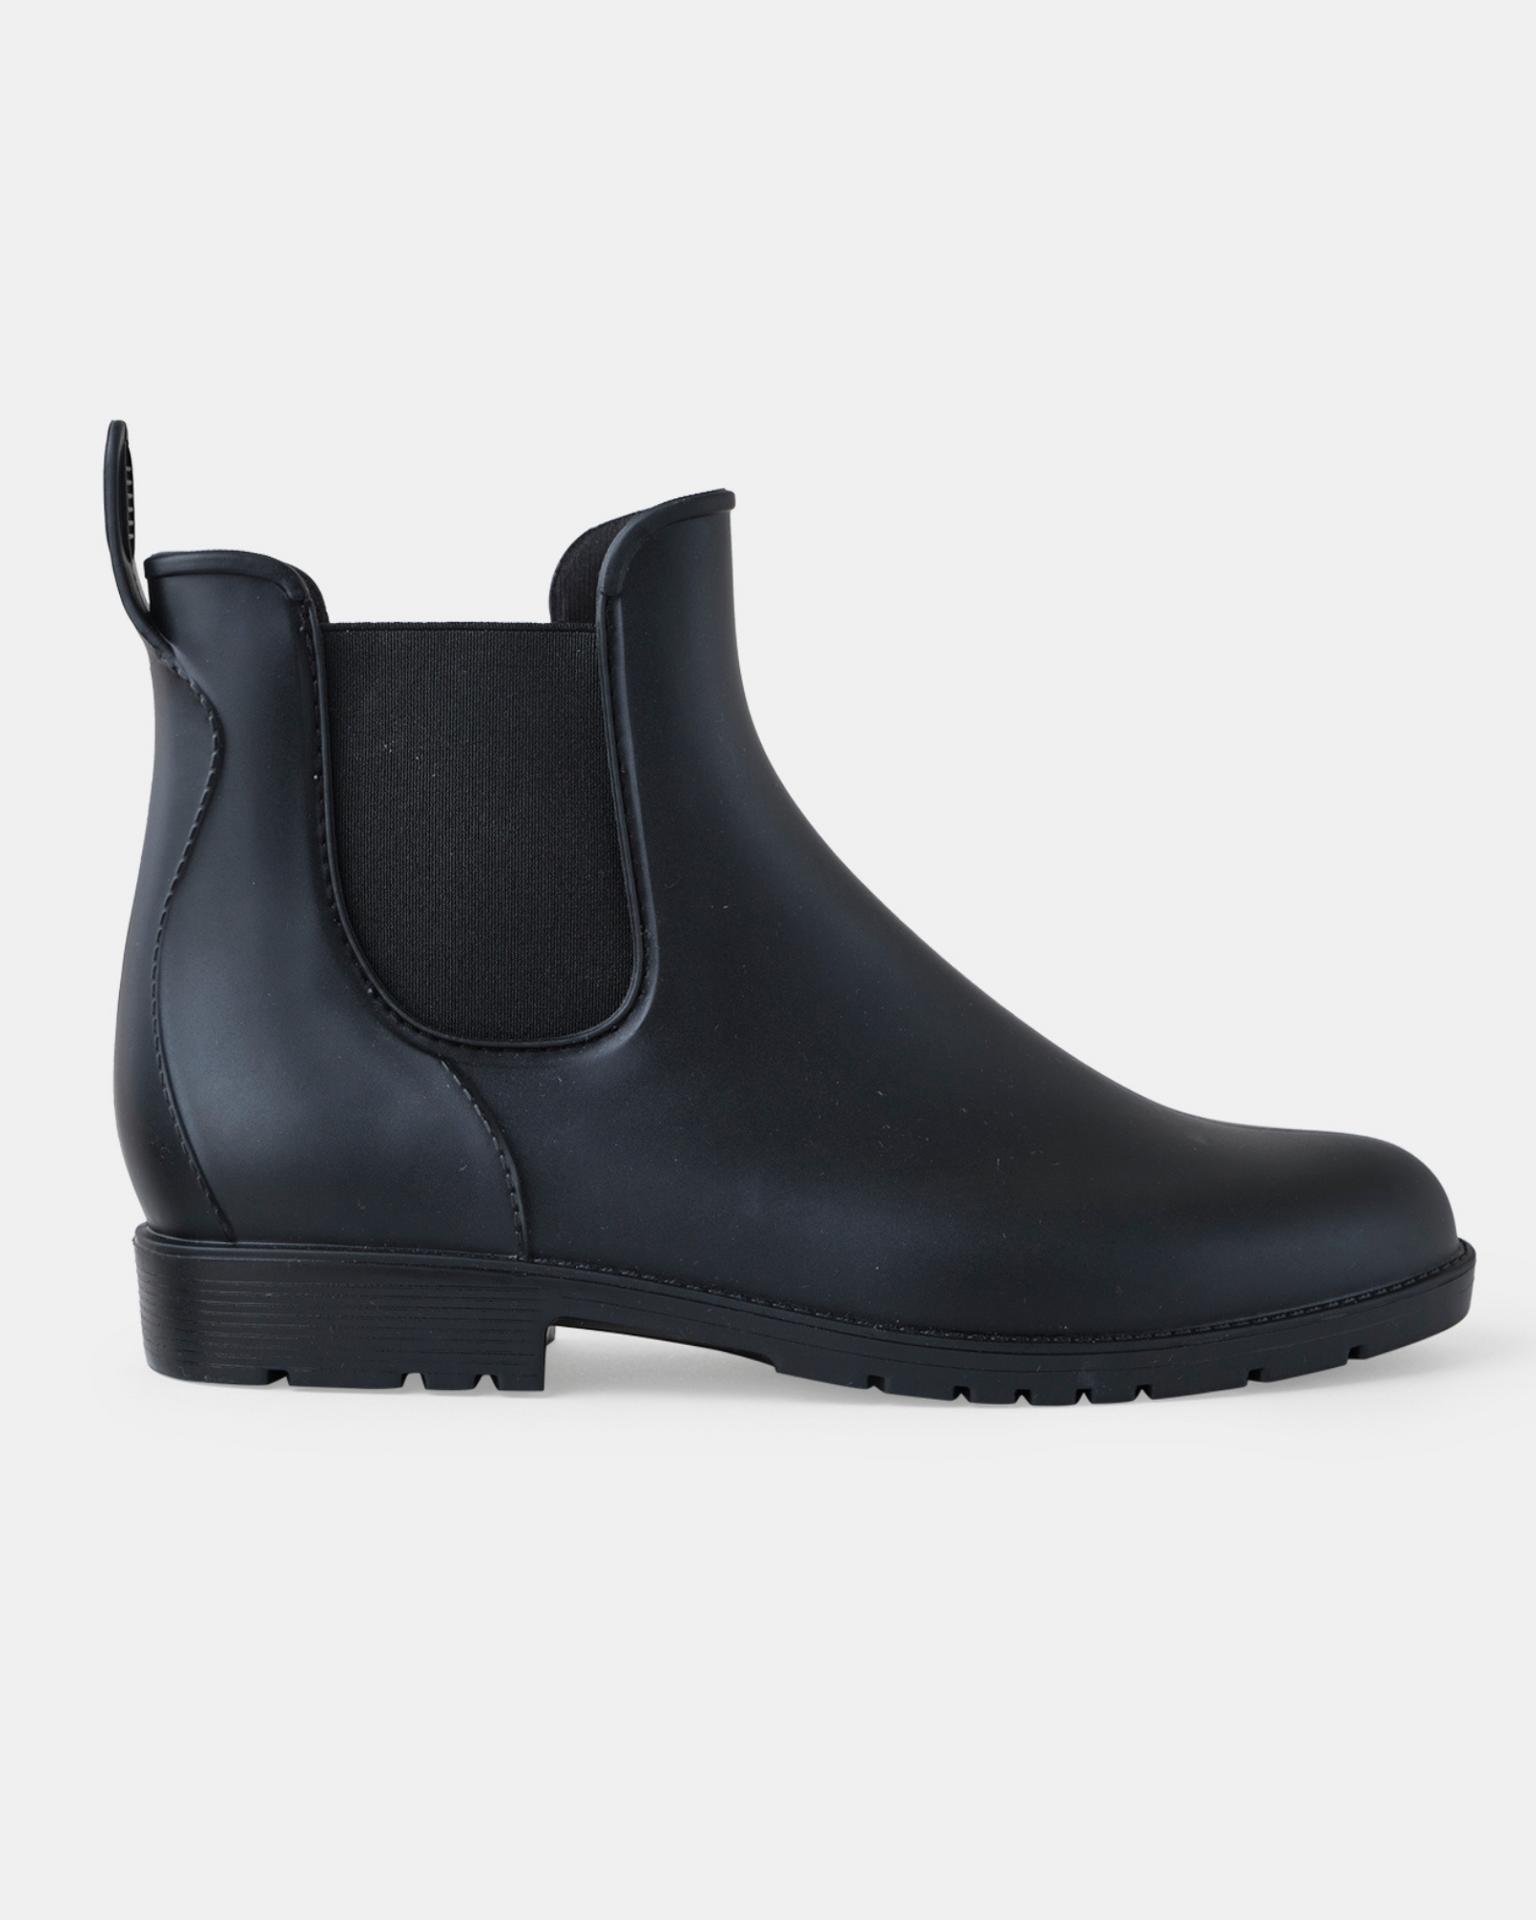 Boots | Buy Womens Boots Online | Walnut Melbourne